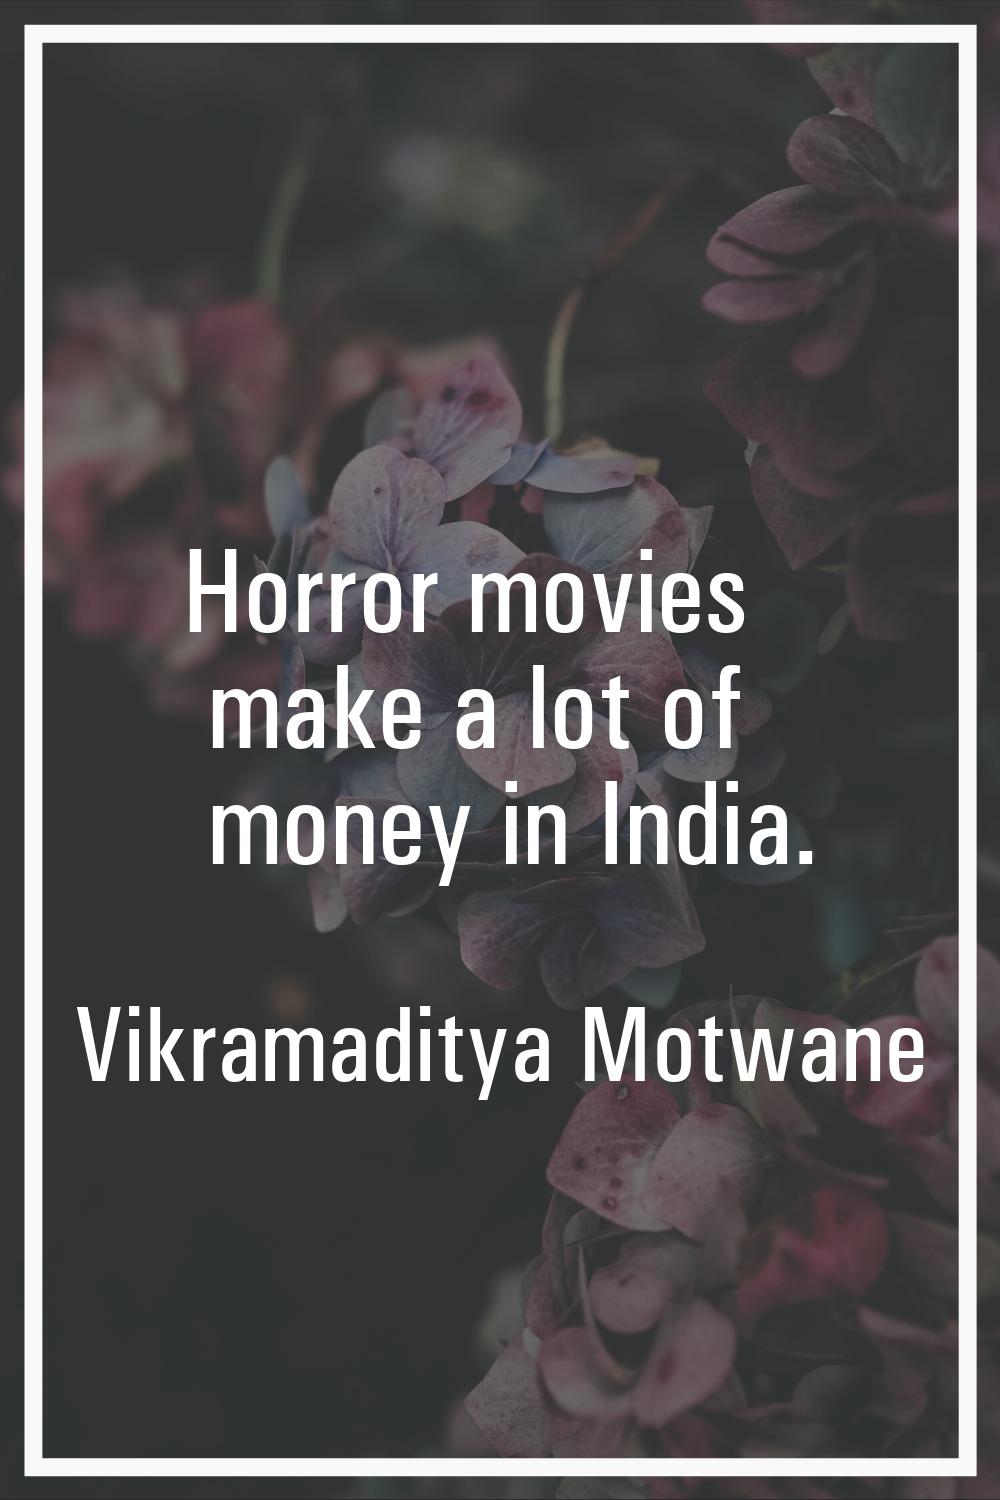 Horror movies make a lot of money in India.